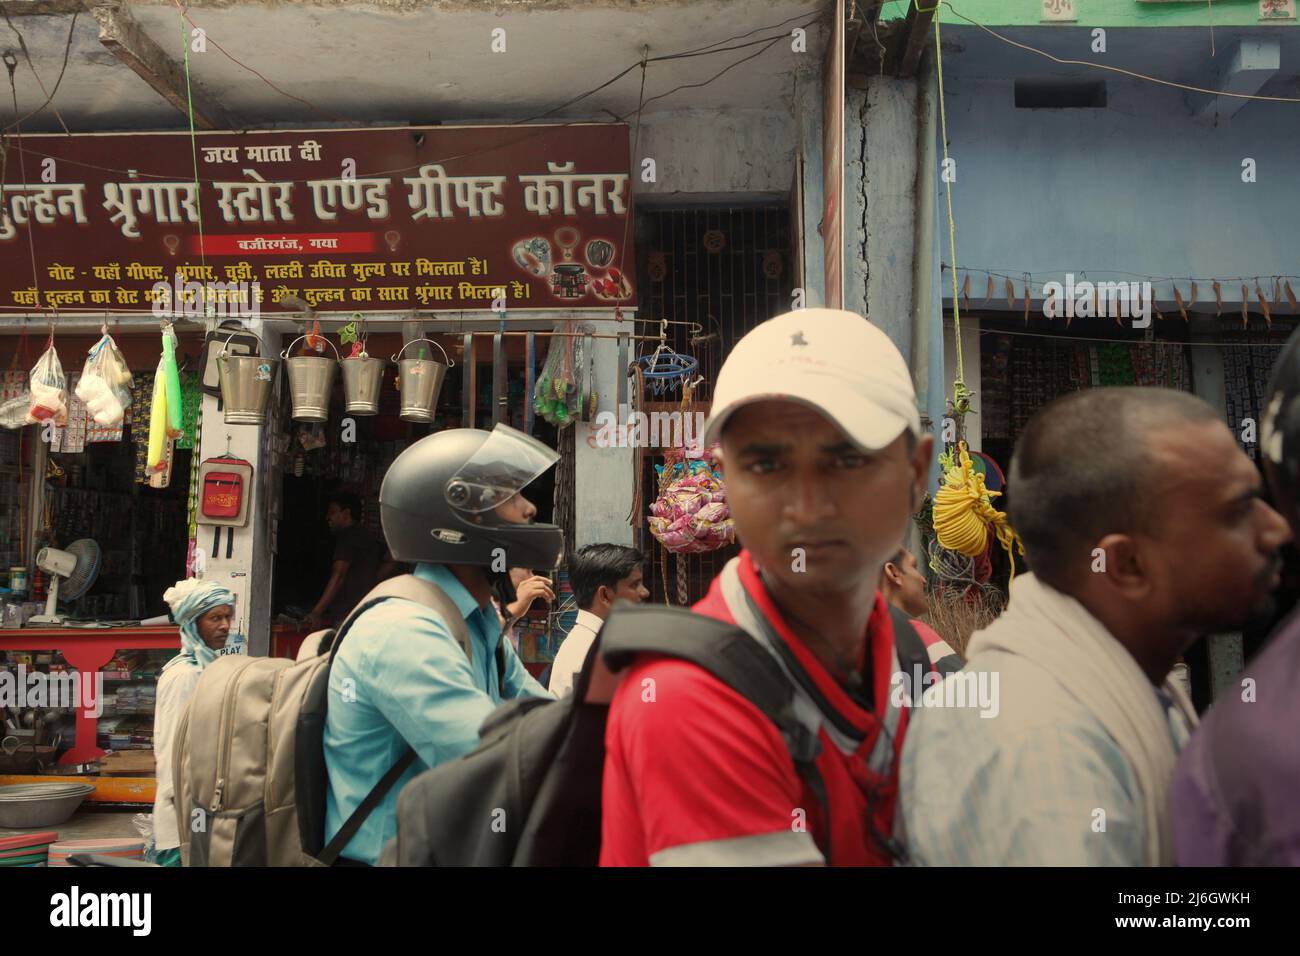 Motorists during a traffic jam in a background of a roadside shop in Bihar, India. Stock Photo